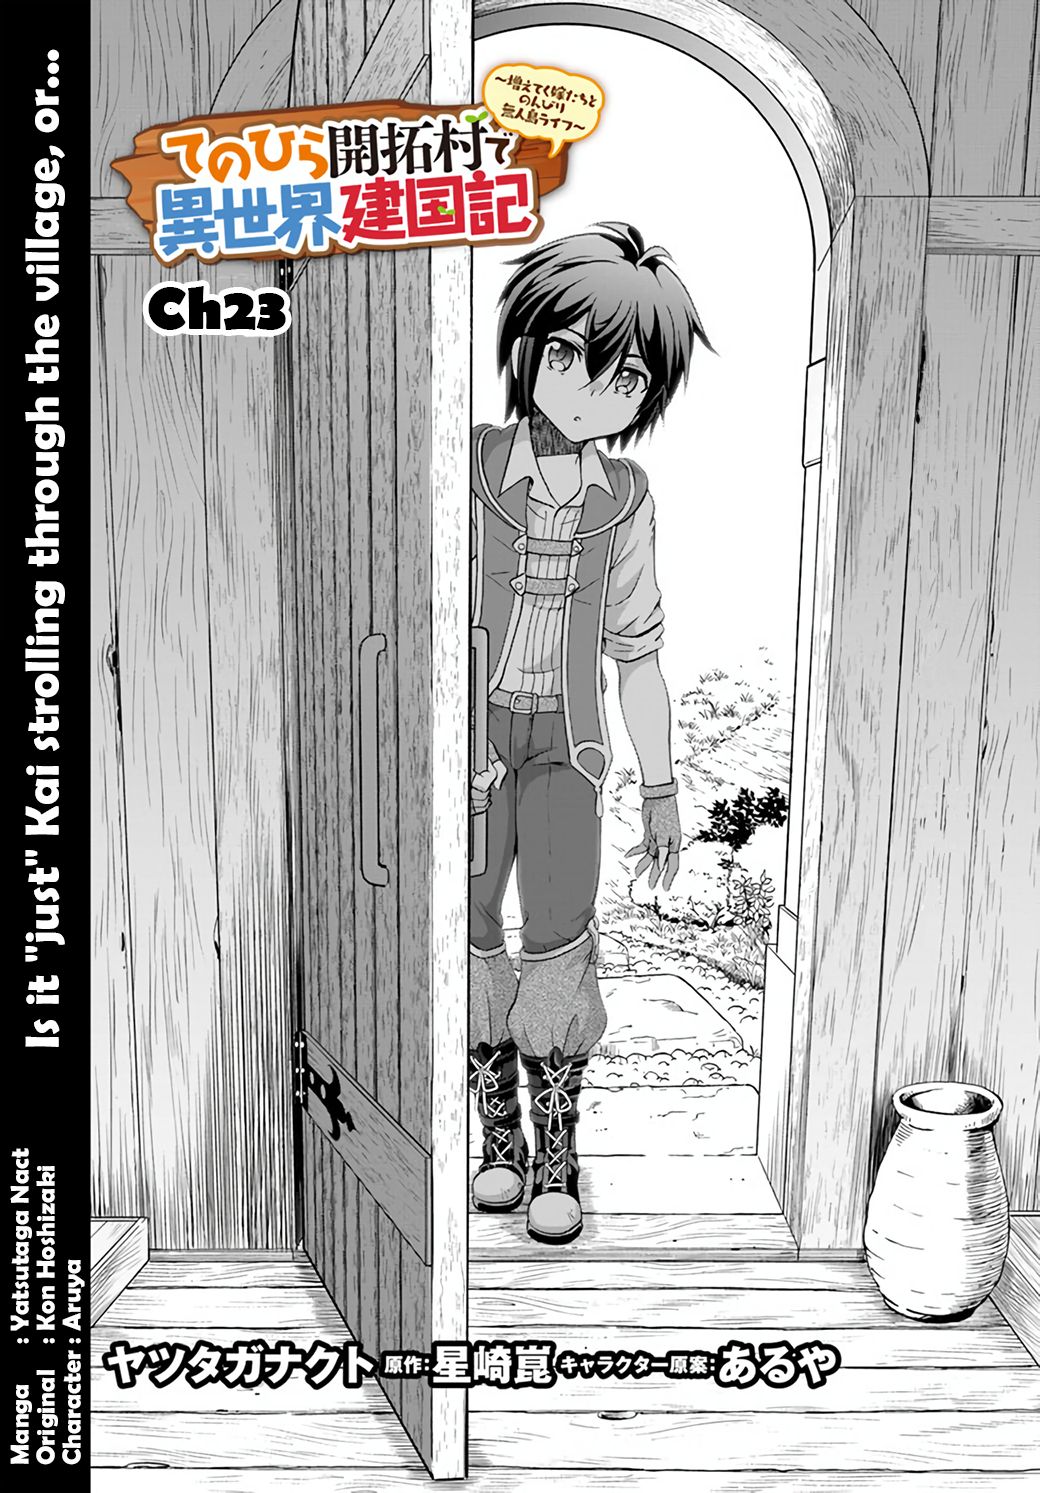 With Single Palm Founding a Pioneering Village a in Another World - Live With The Married Girls in Uninhabited Island Life ~ - chapter 23 - #2